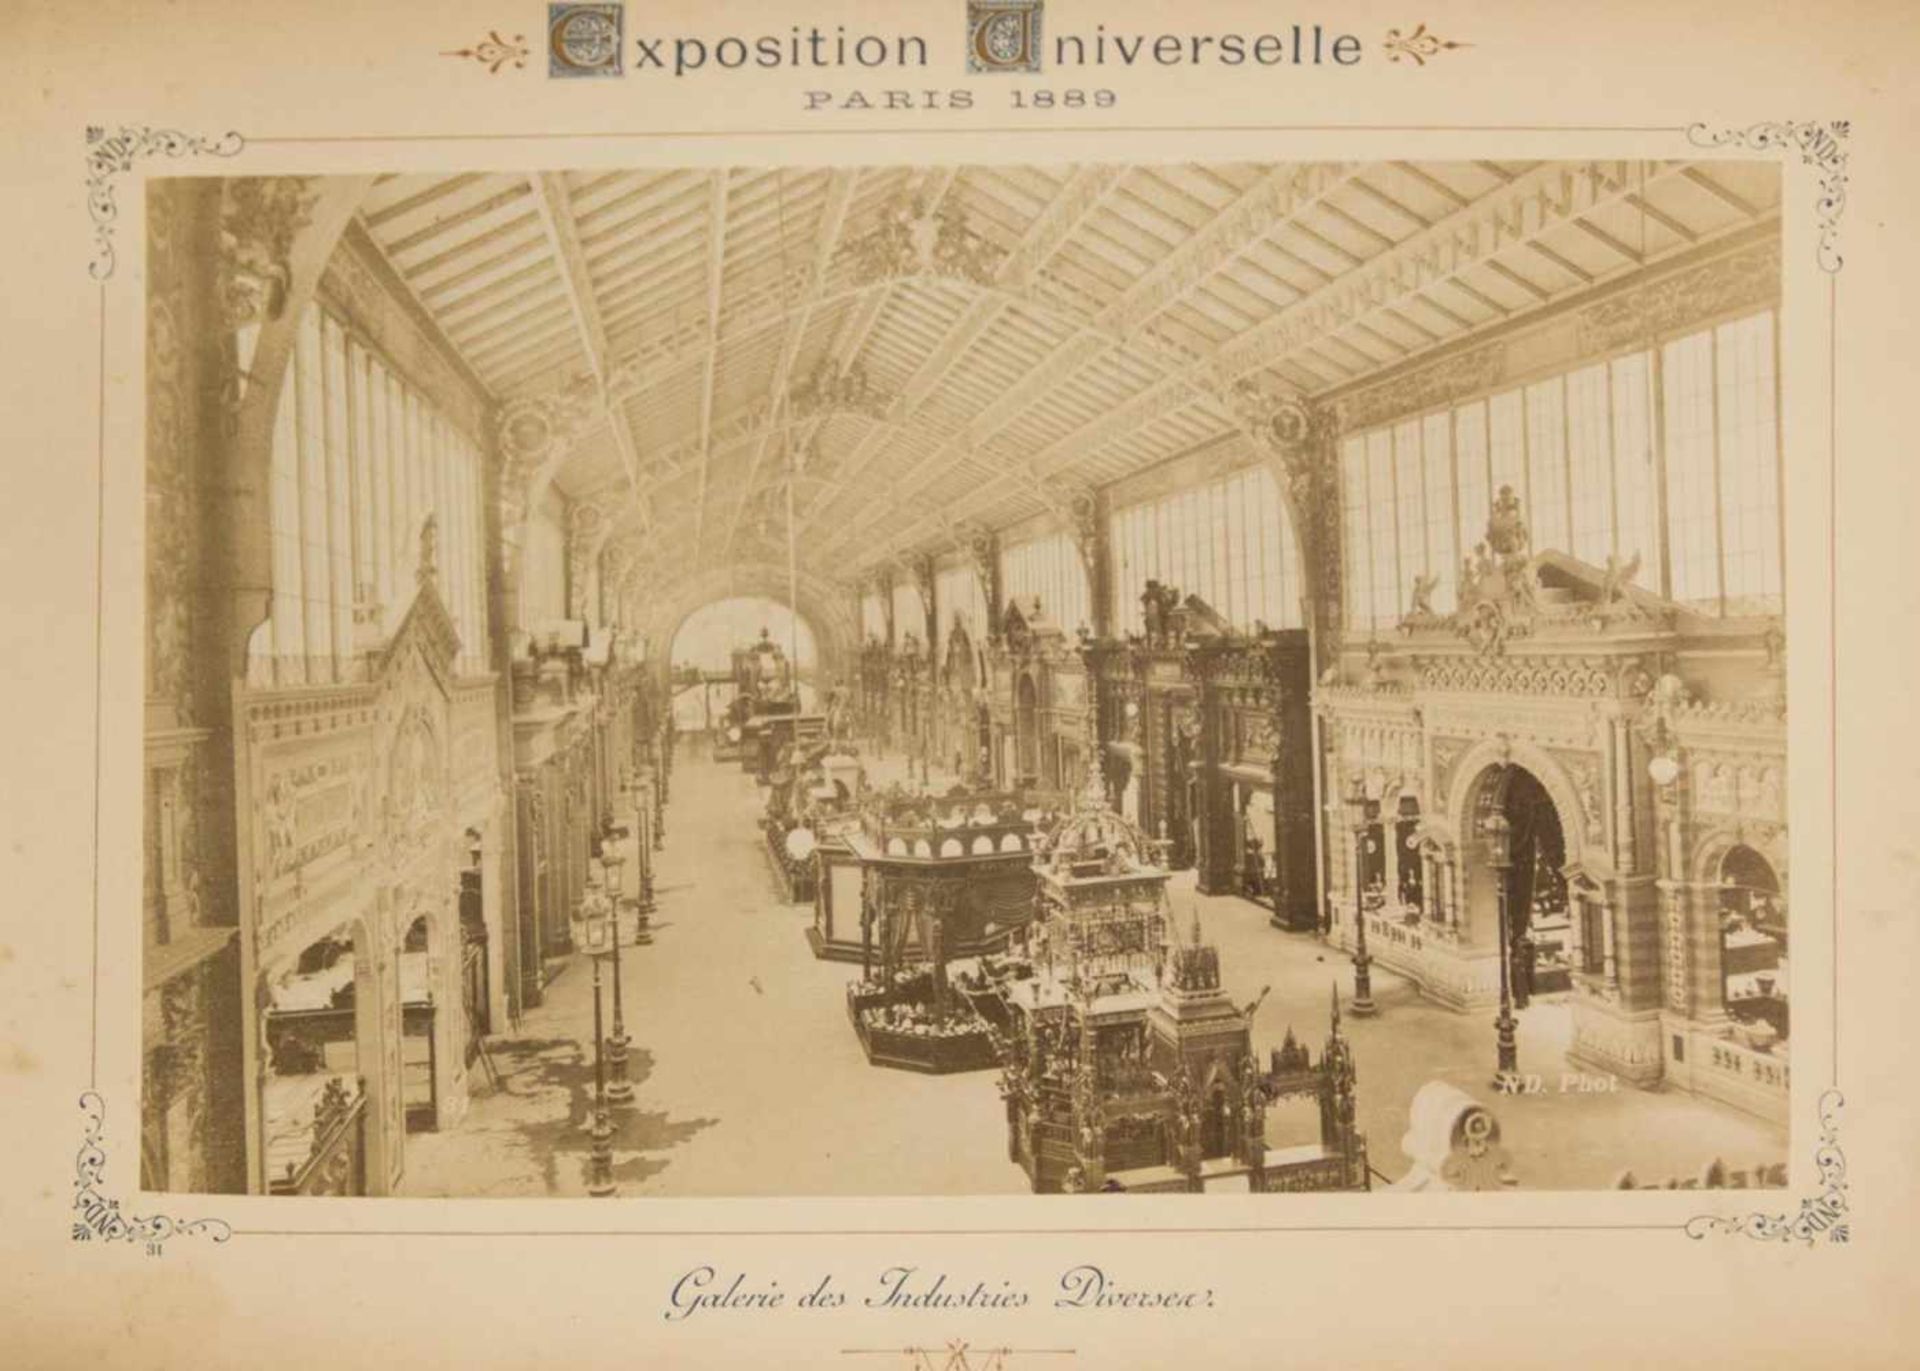 Exposition Universelle. 1889. Paris. 27x18,5 cm. France. In the composite cover with gold lettering. - Bild 5 aus 9